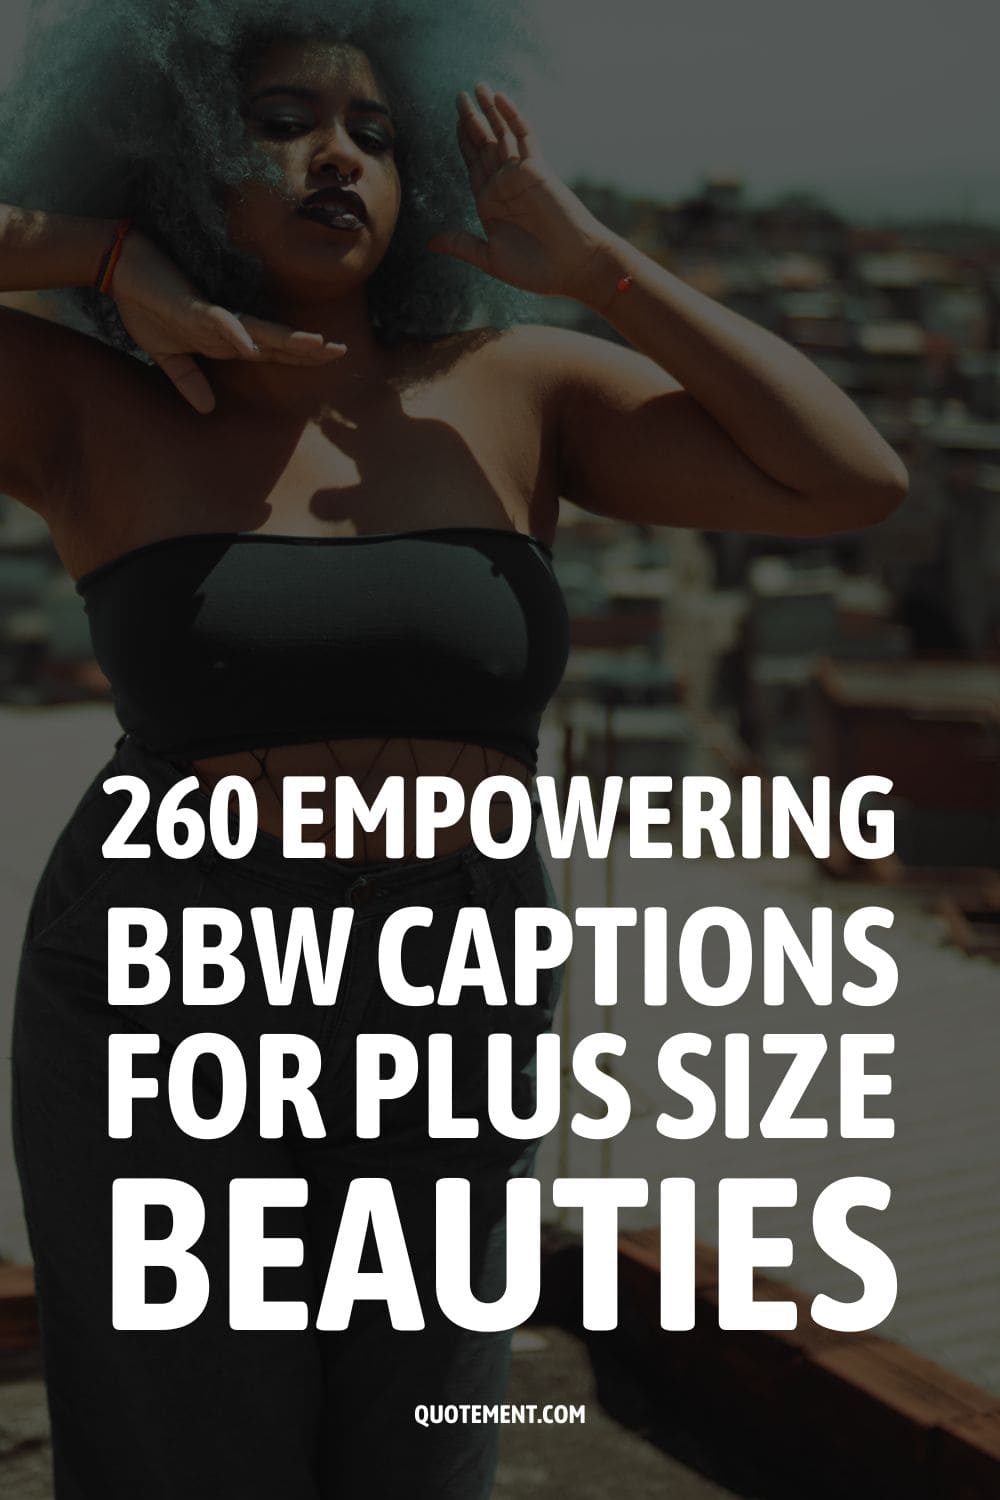 260 Empowering BBW Captions For Plus Size Beauties
